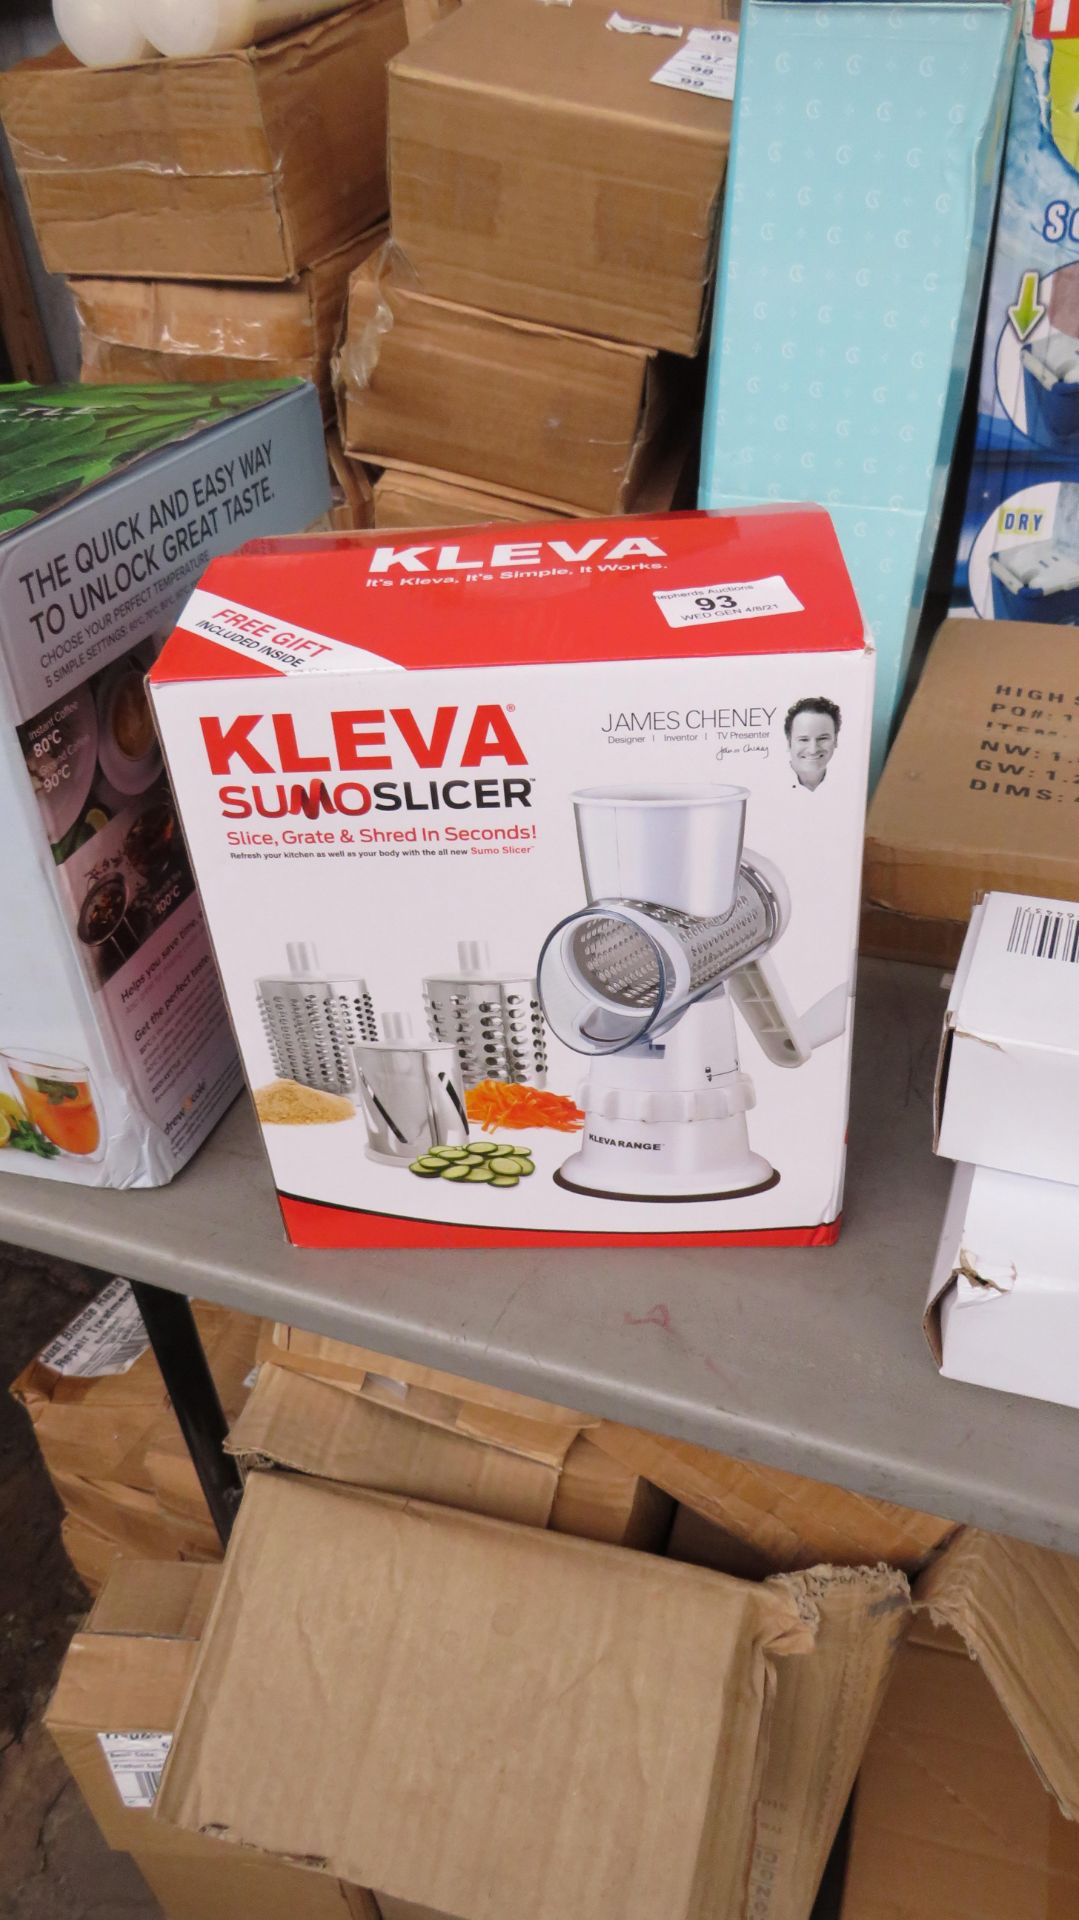 1X KLEVA SIMO SLICER, UNCHECKED AND BOXED.